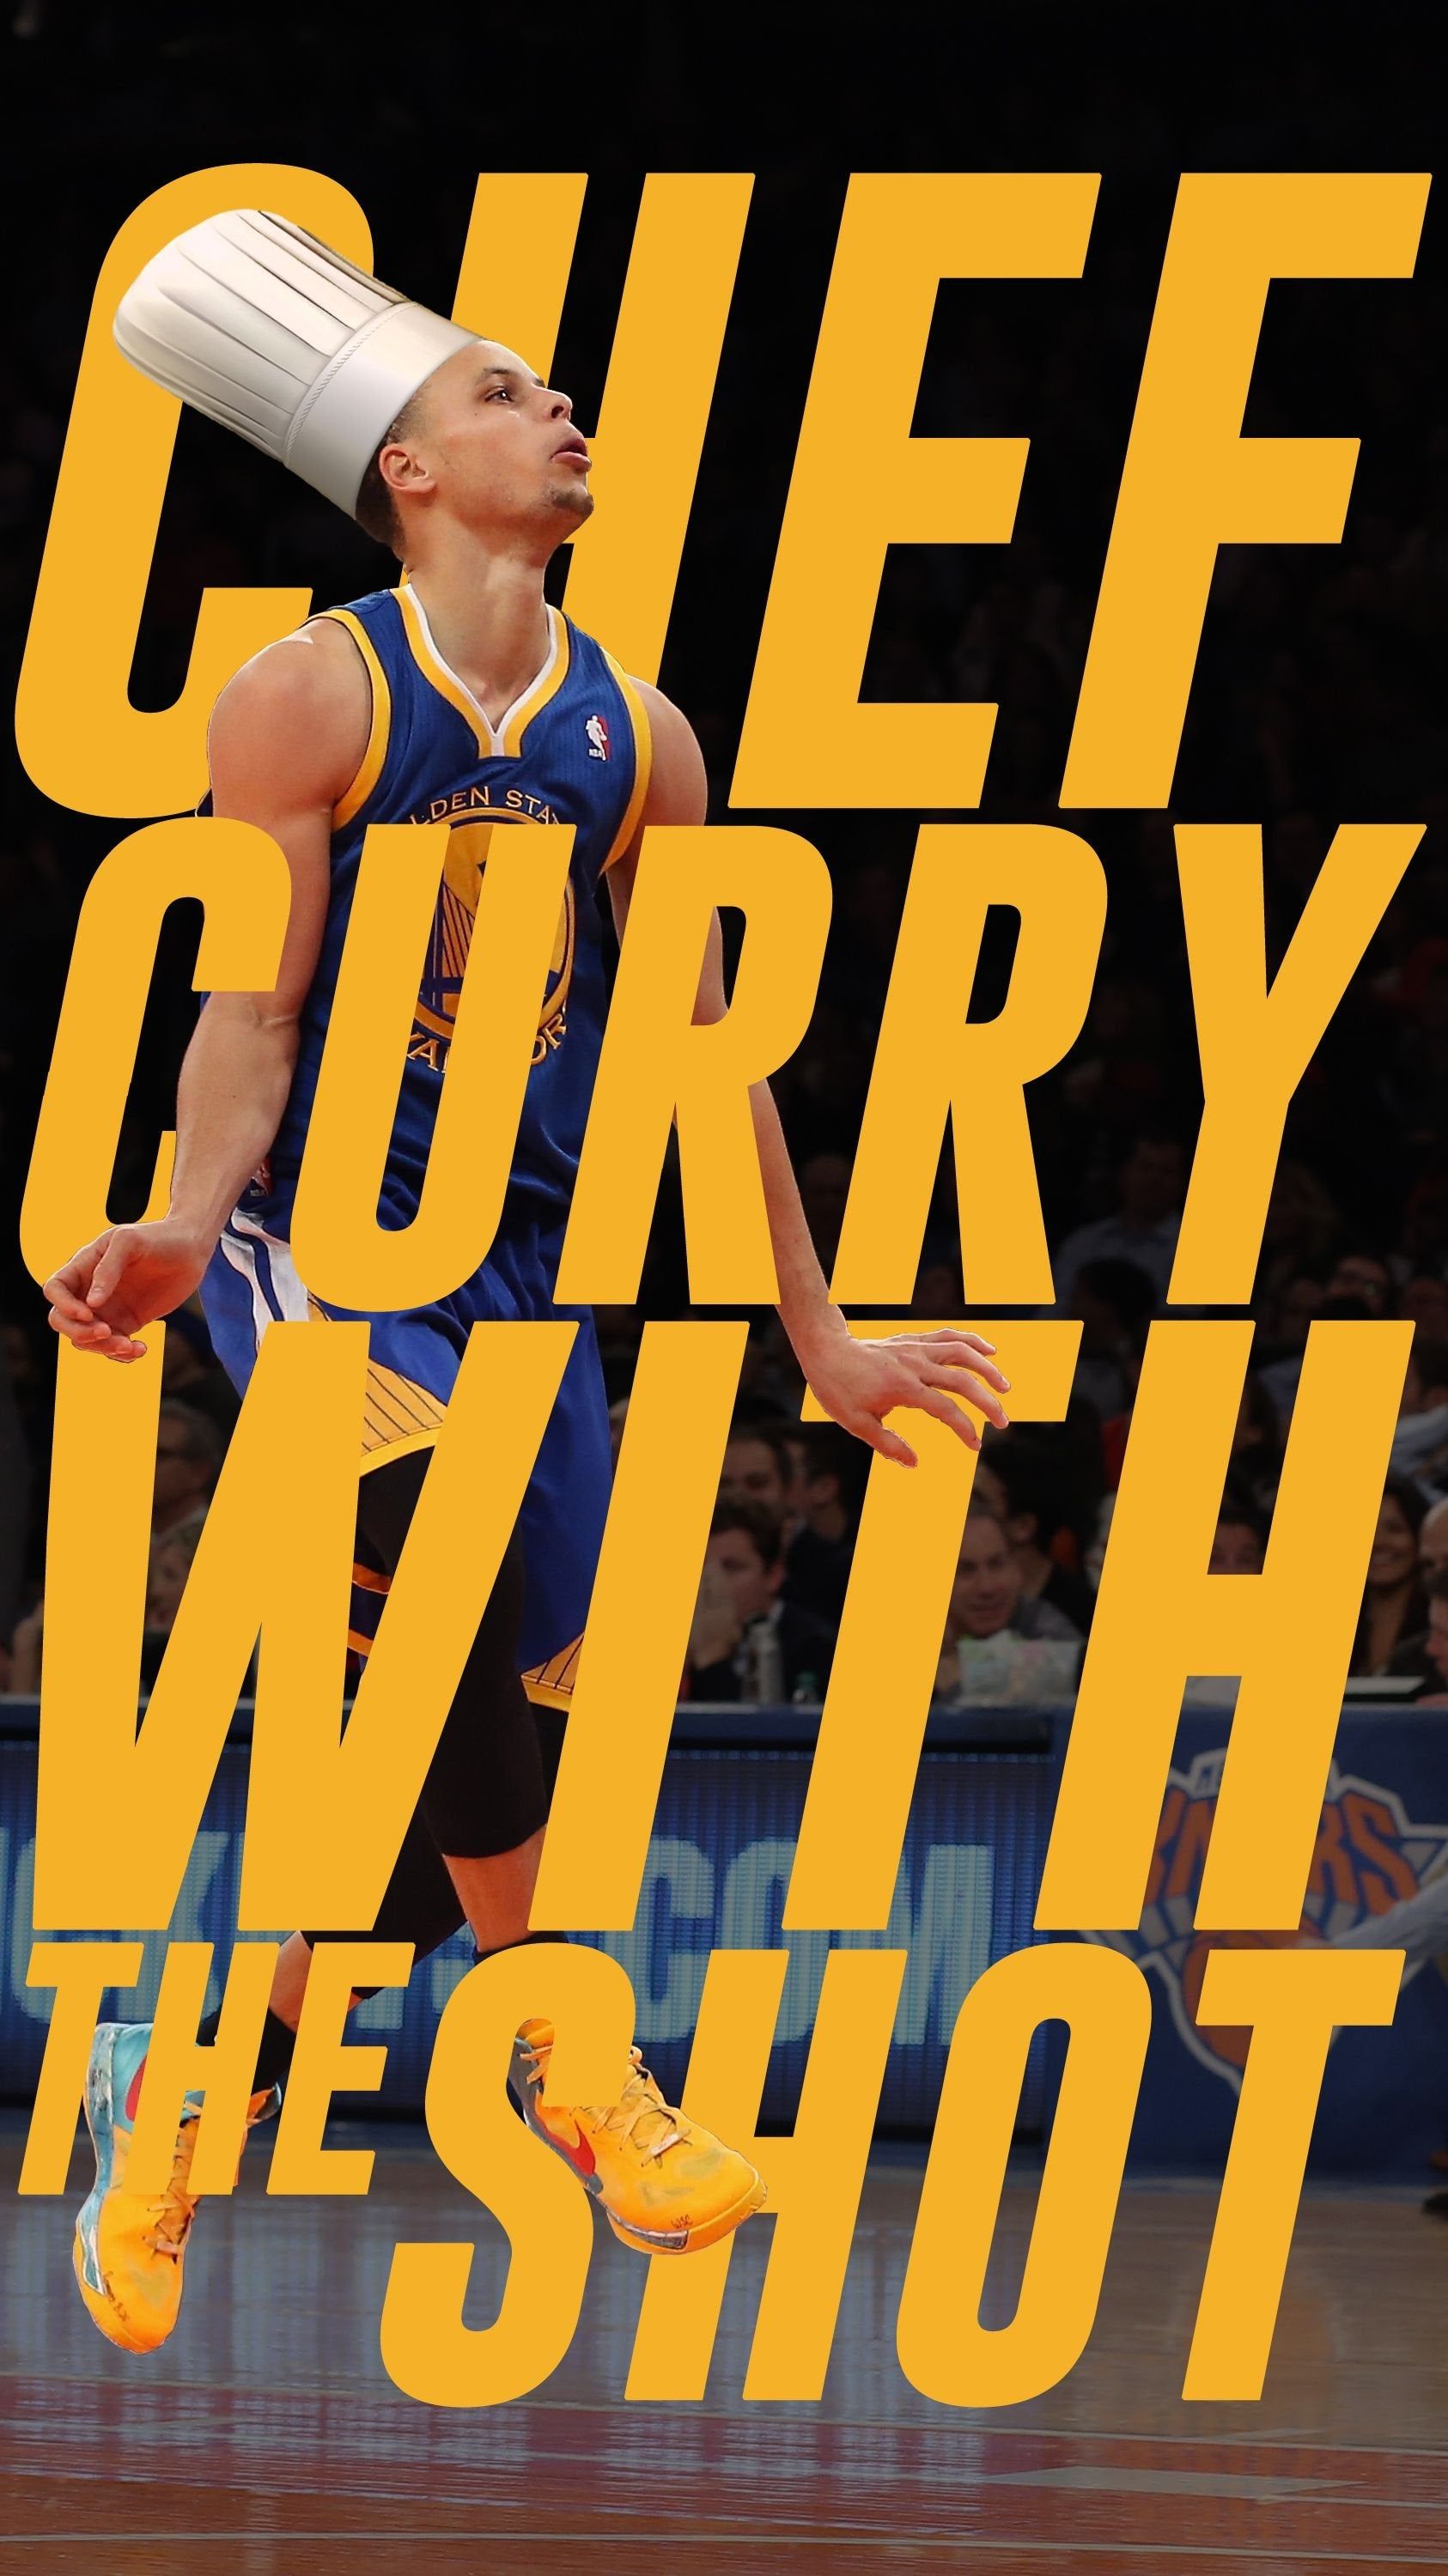 Hey Warriors fans! As a fellow Steph Curry fan, I wanted to whip